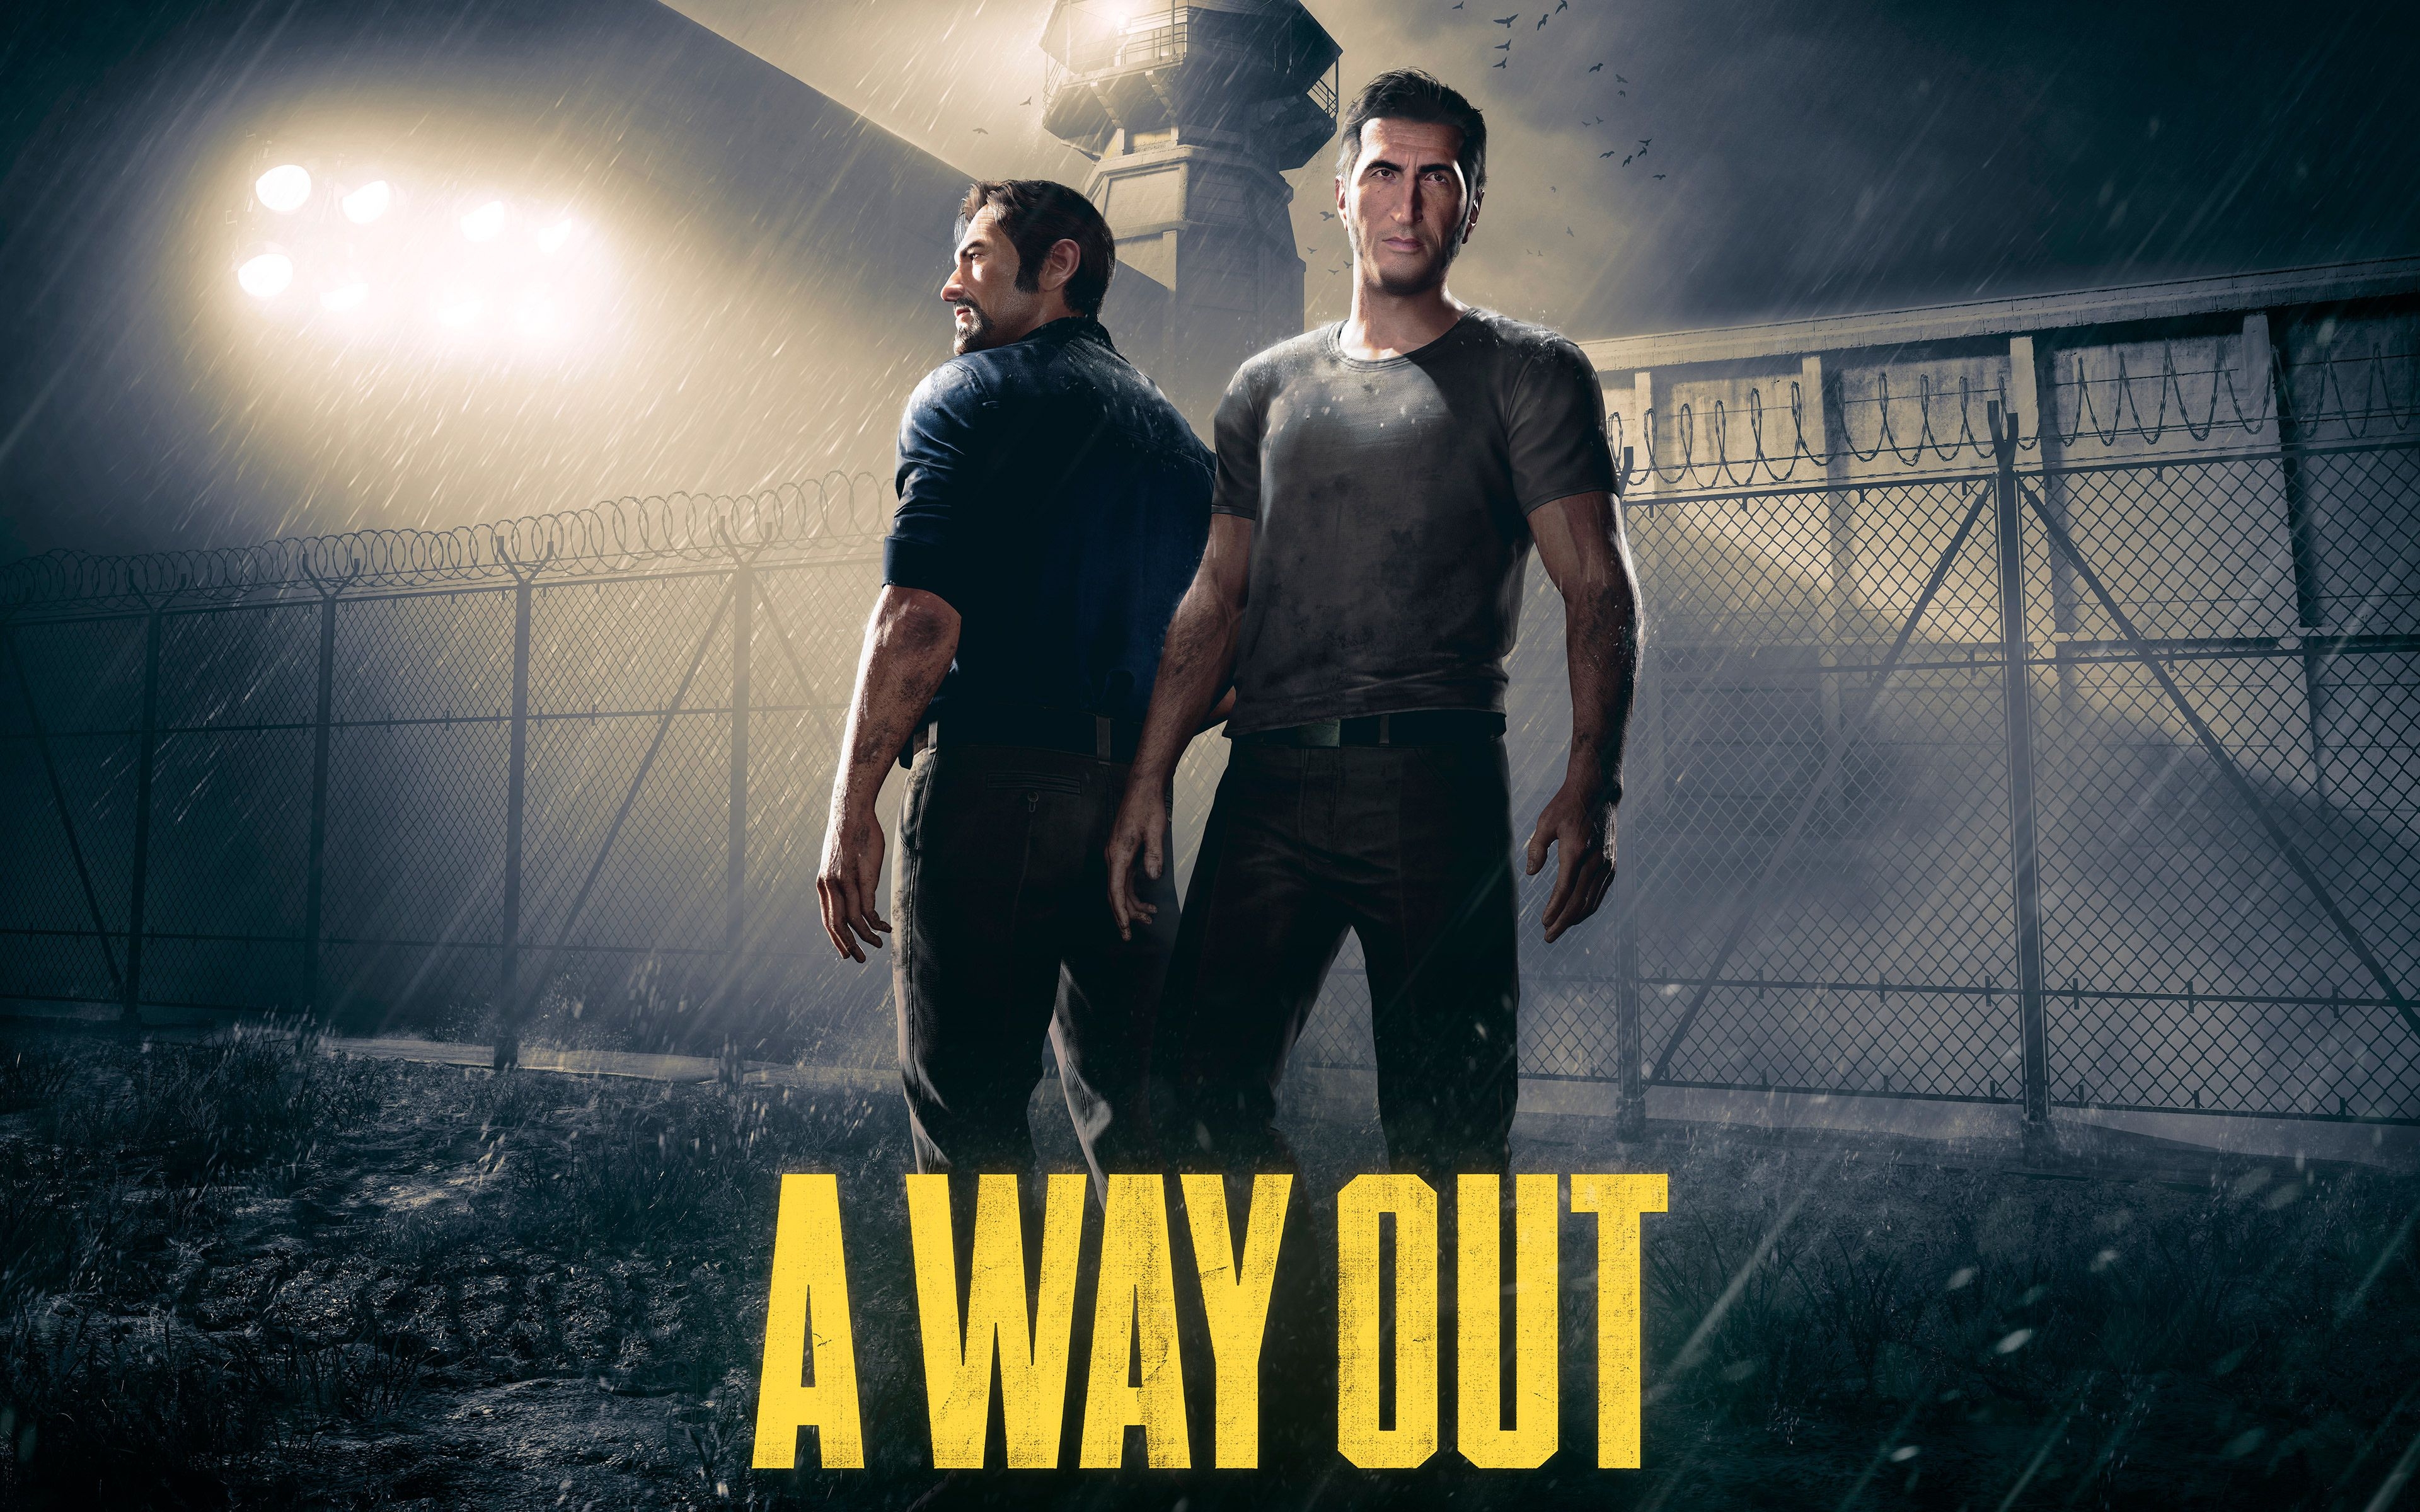 is a way out on xbox